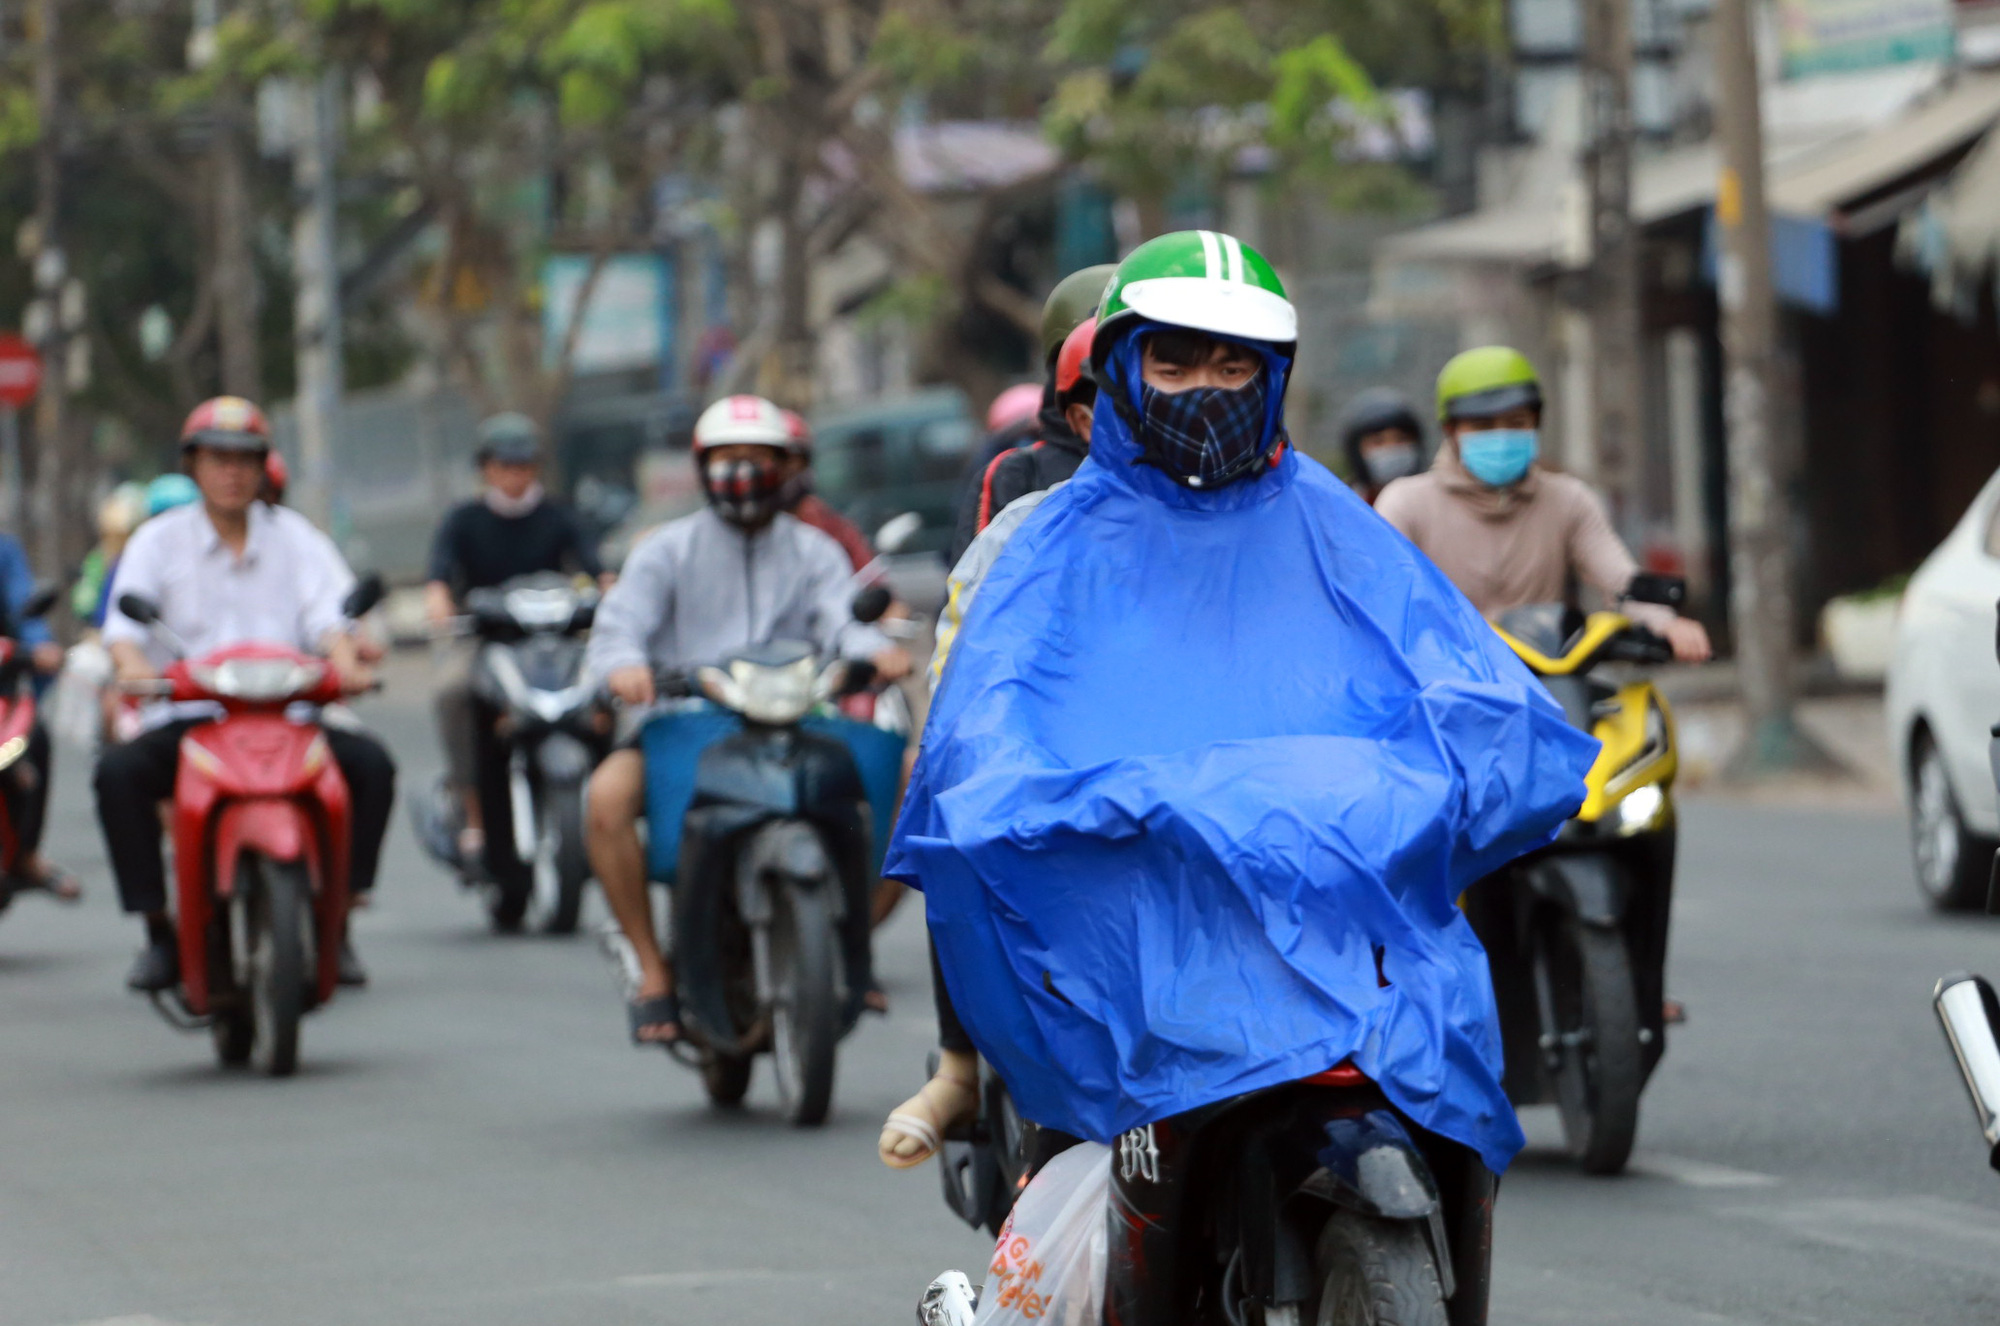 Cold spell to bring low temperature, unseasonal rain to southern Vietnam this week